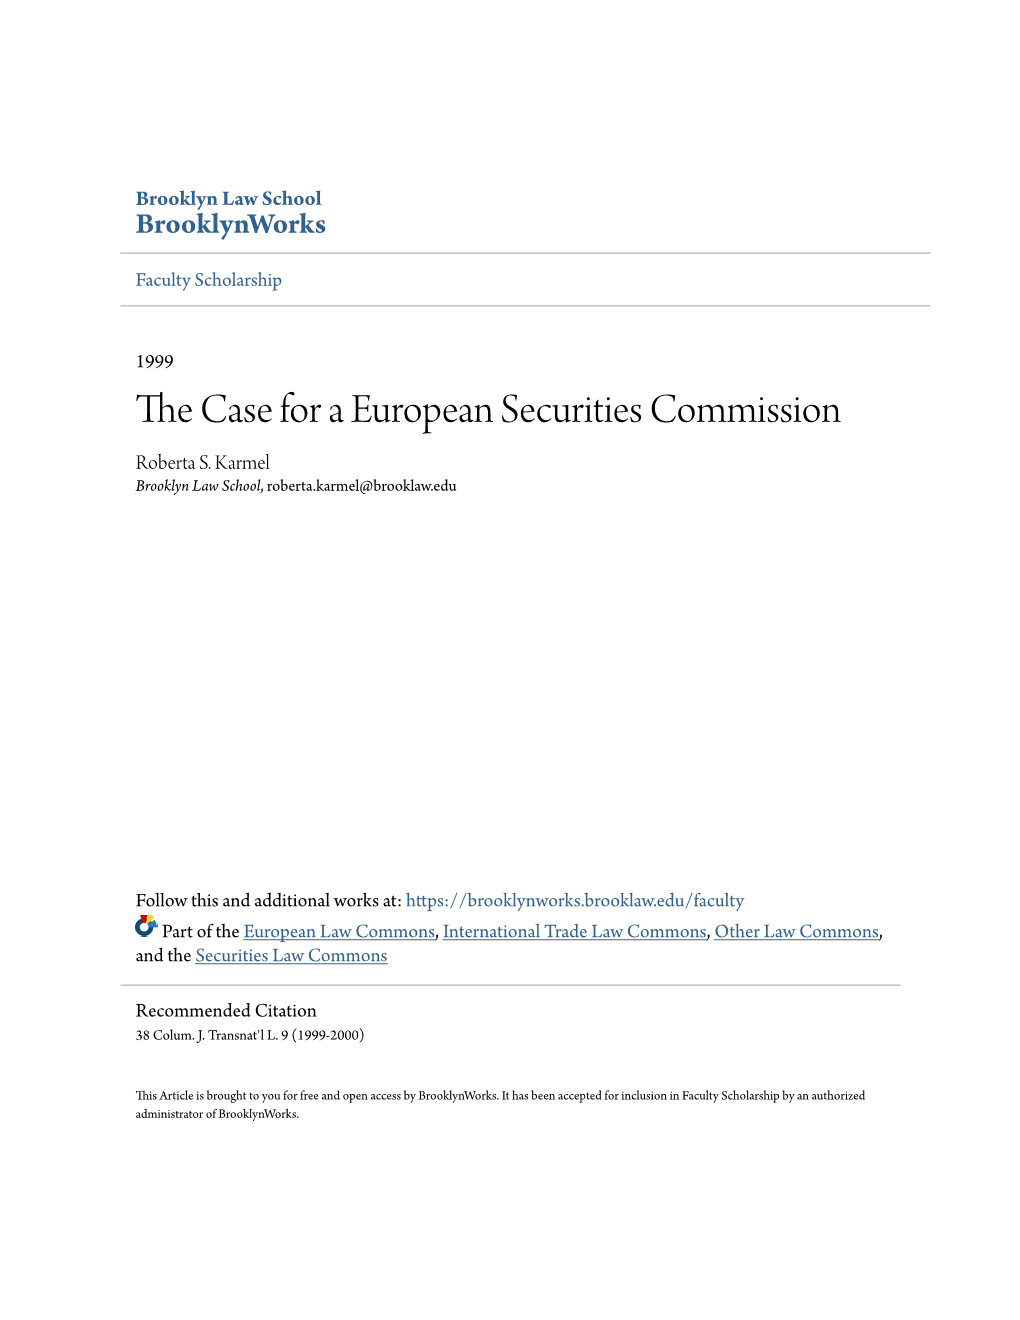 The Case for a European Securities Commission